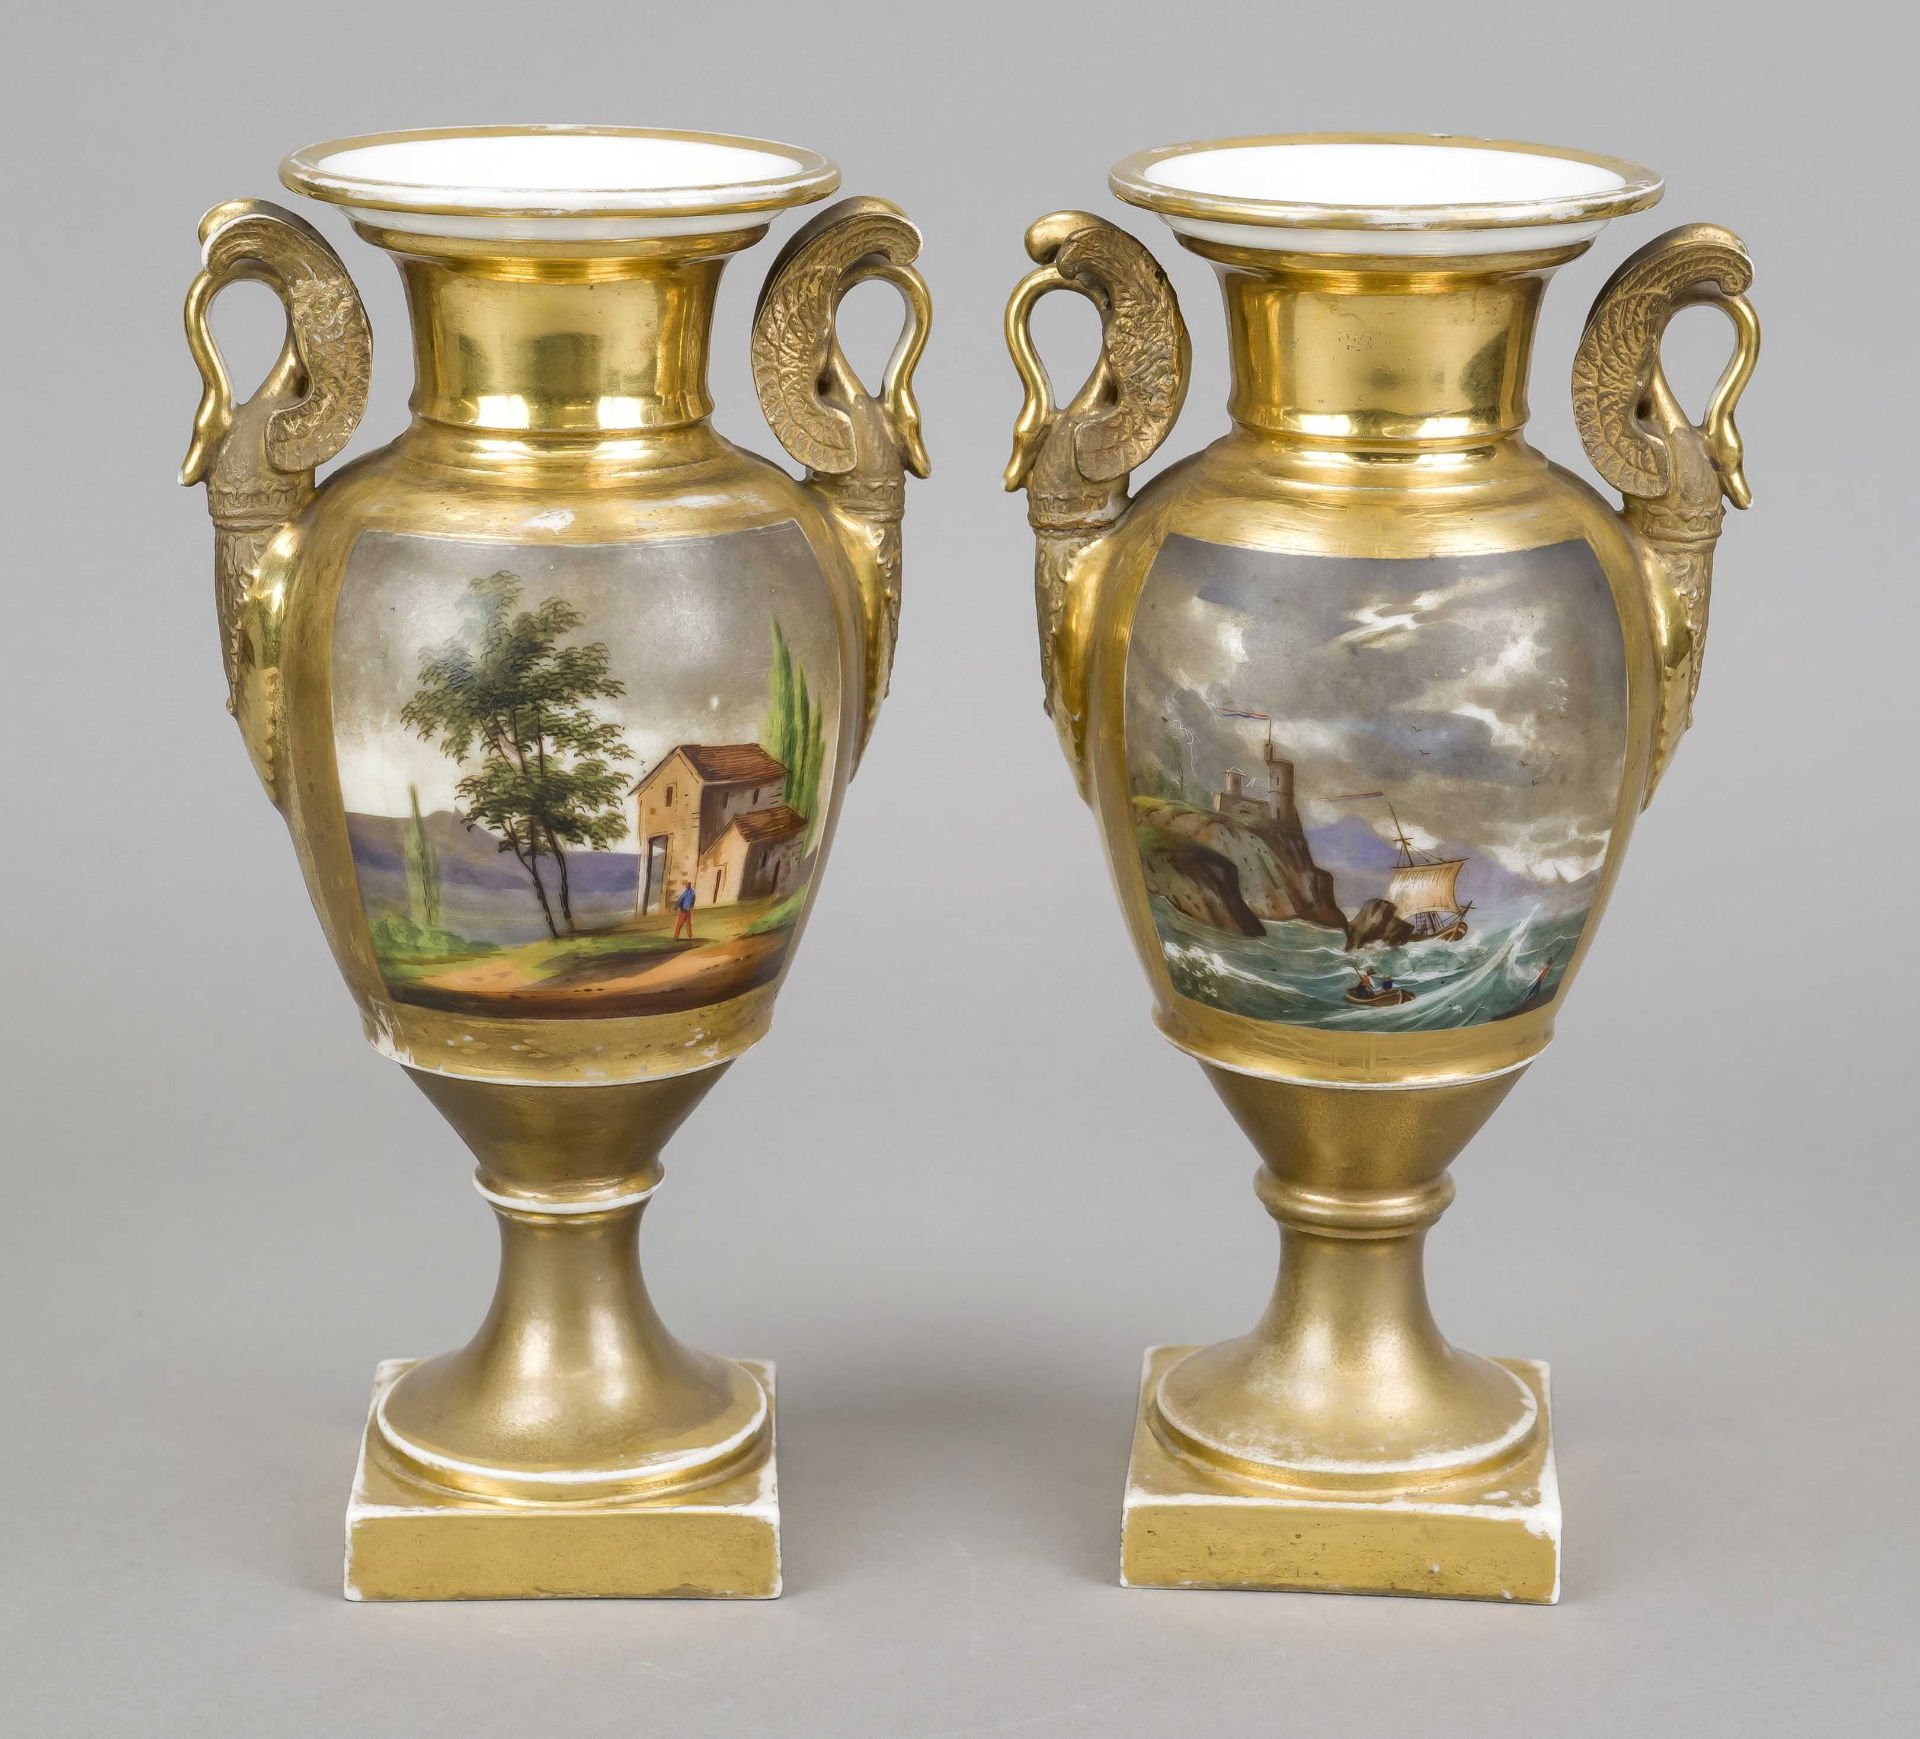 A pair of ornamental vases with swan handles, France, 19th century, polychrome painting with - Image 2 of 2